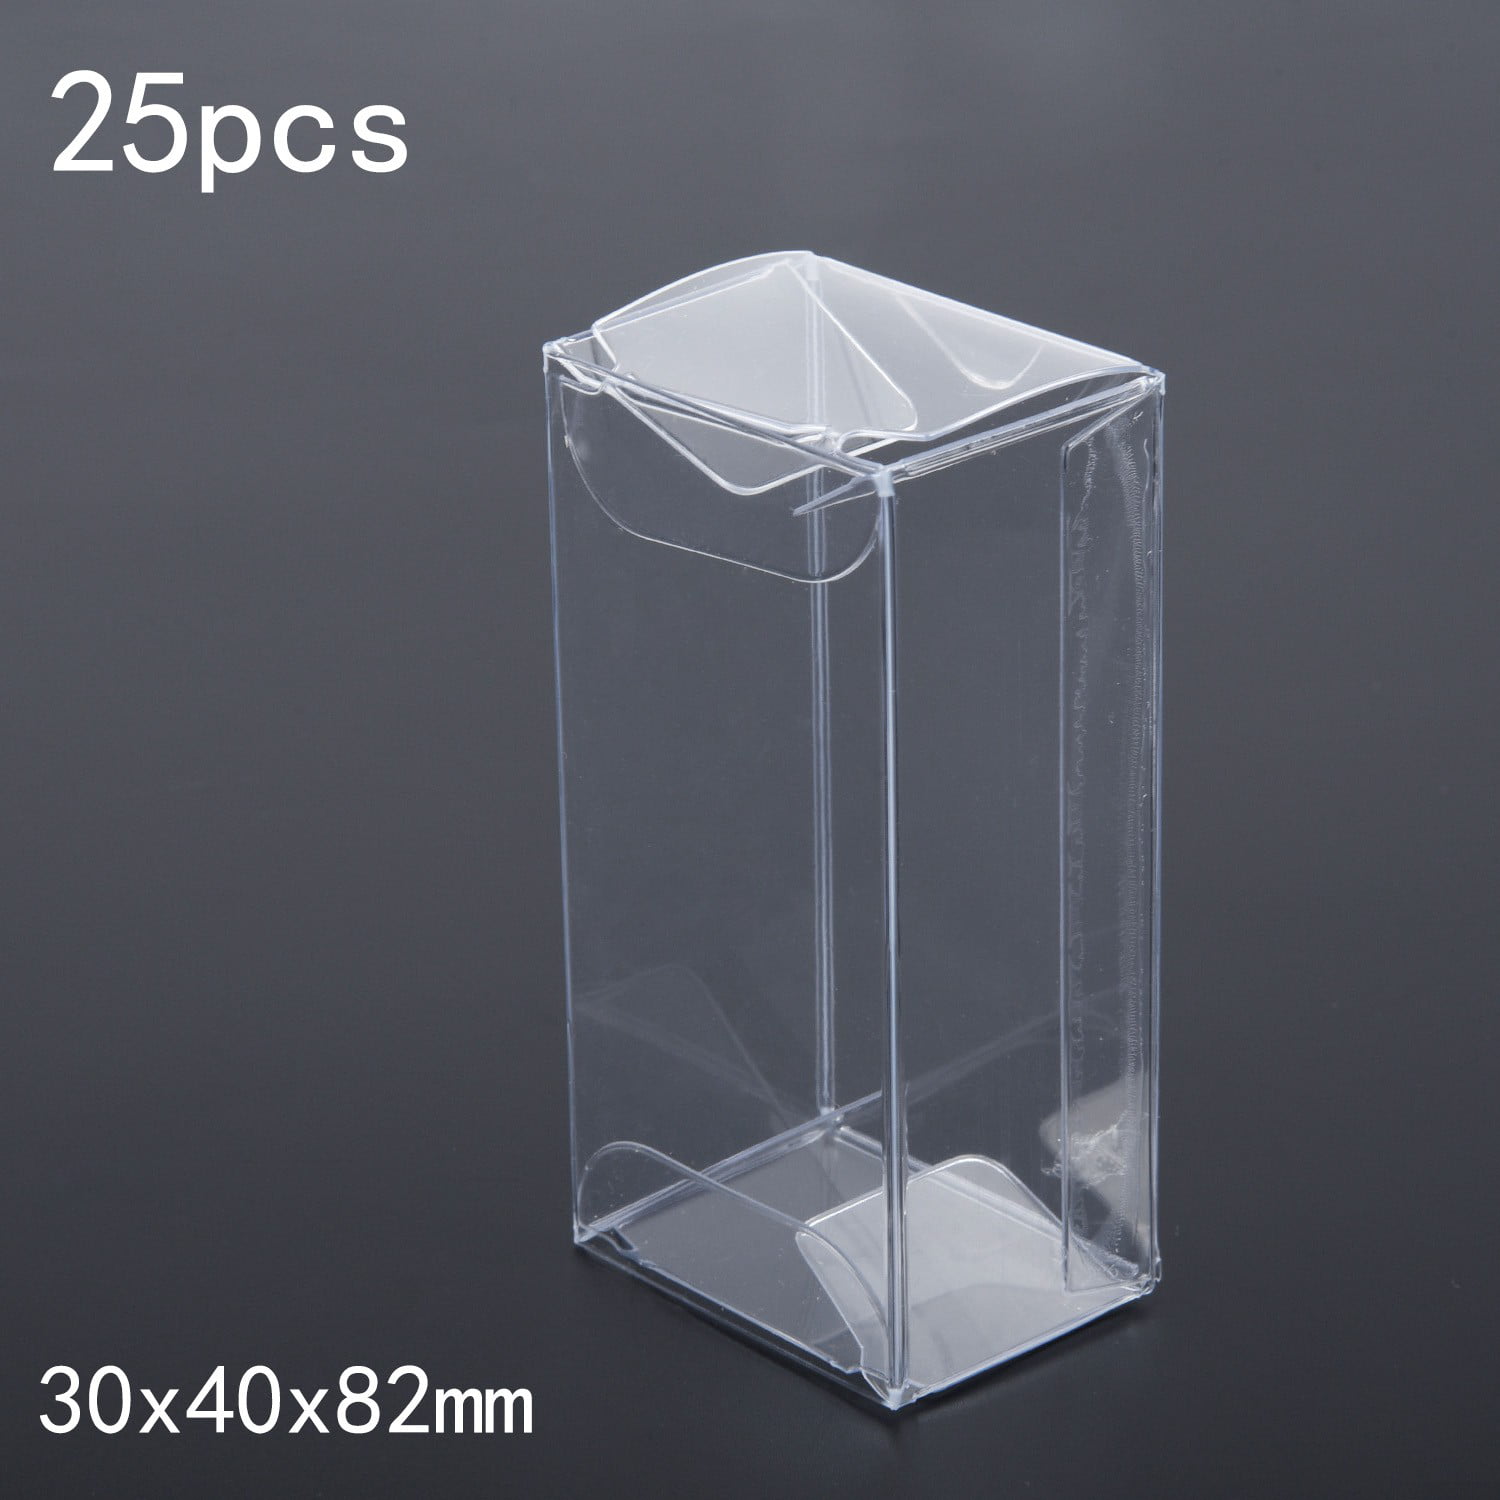 PVC Transparent 1/64 Toys Gifts Car PVC Protector Box Case Display Clear Boxes 